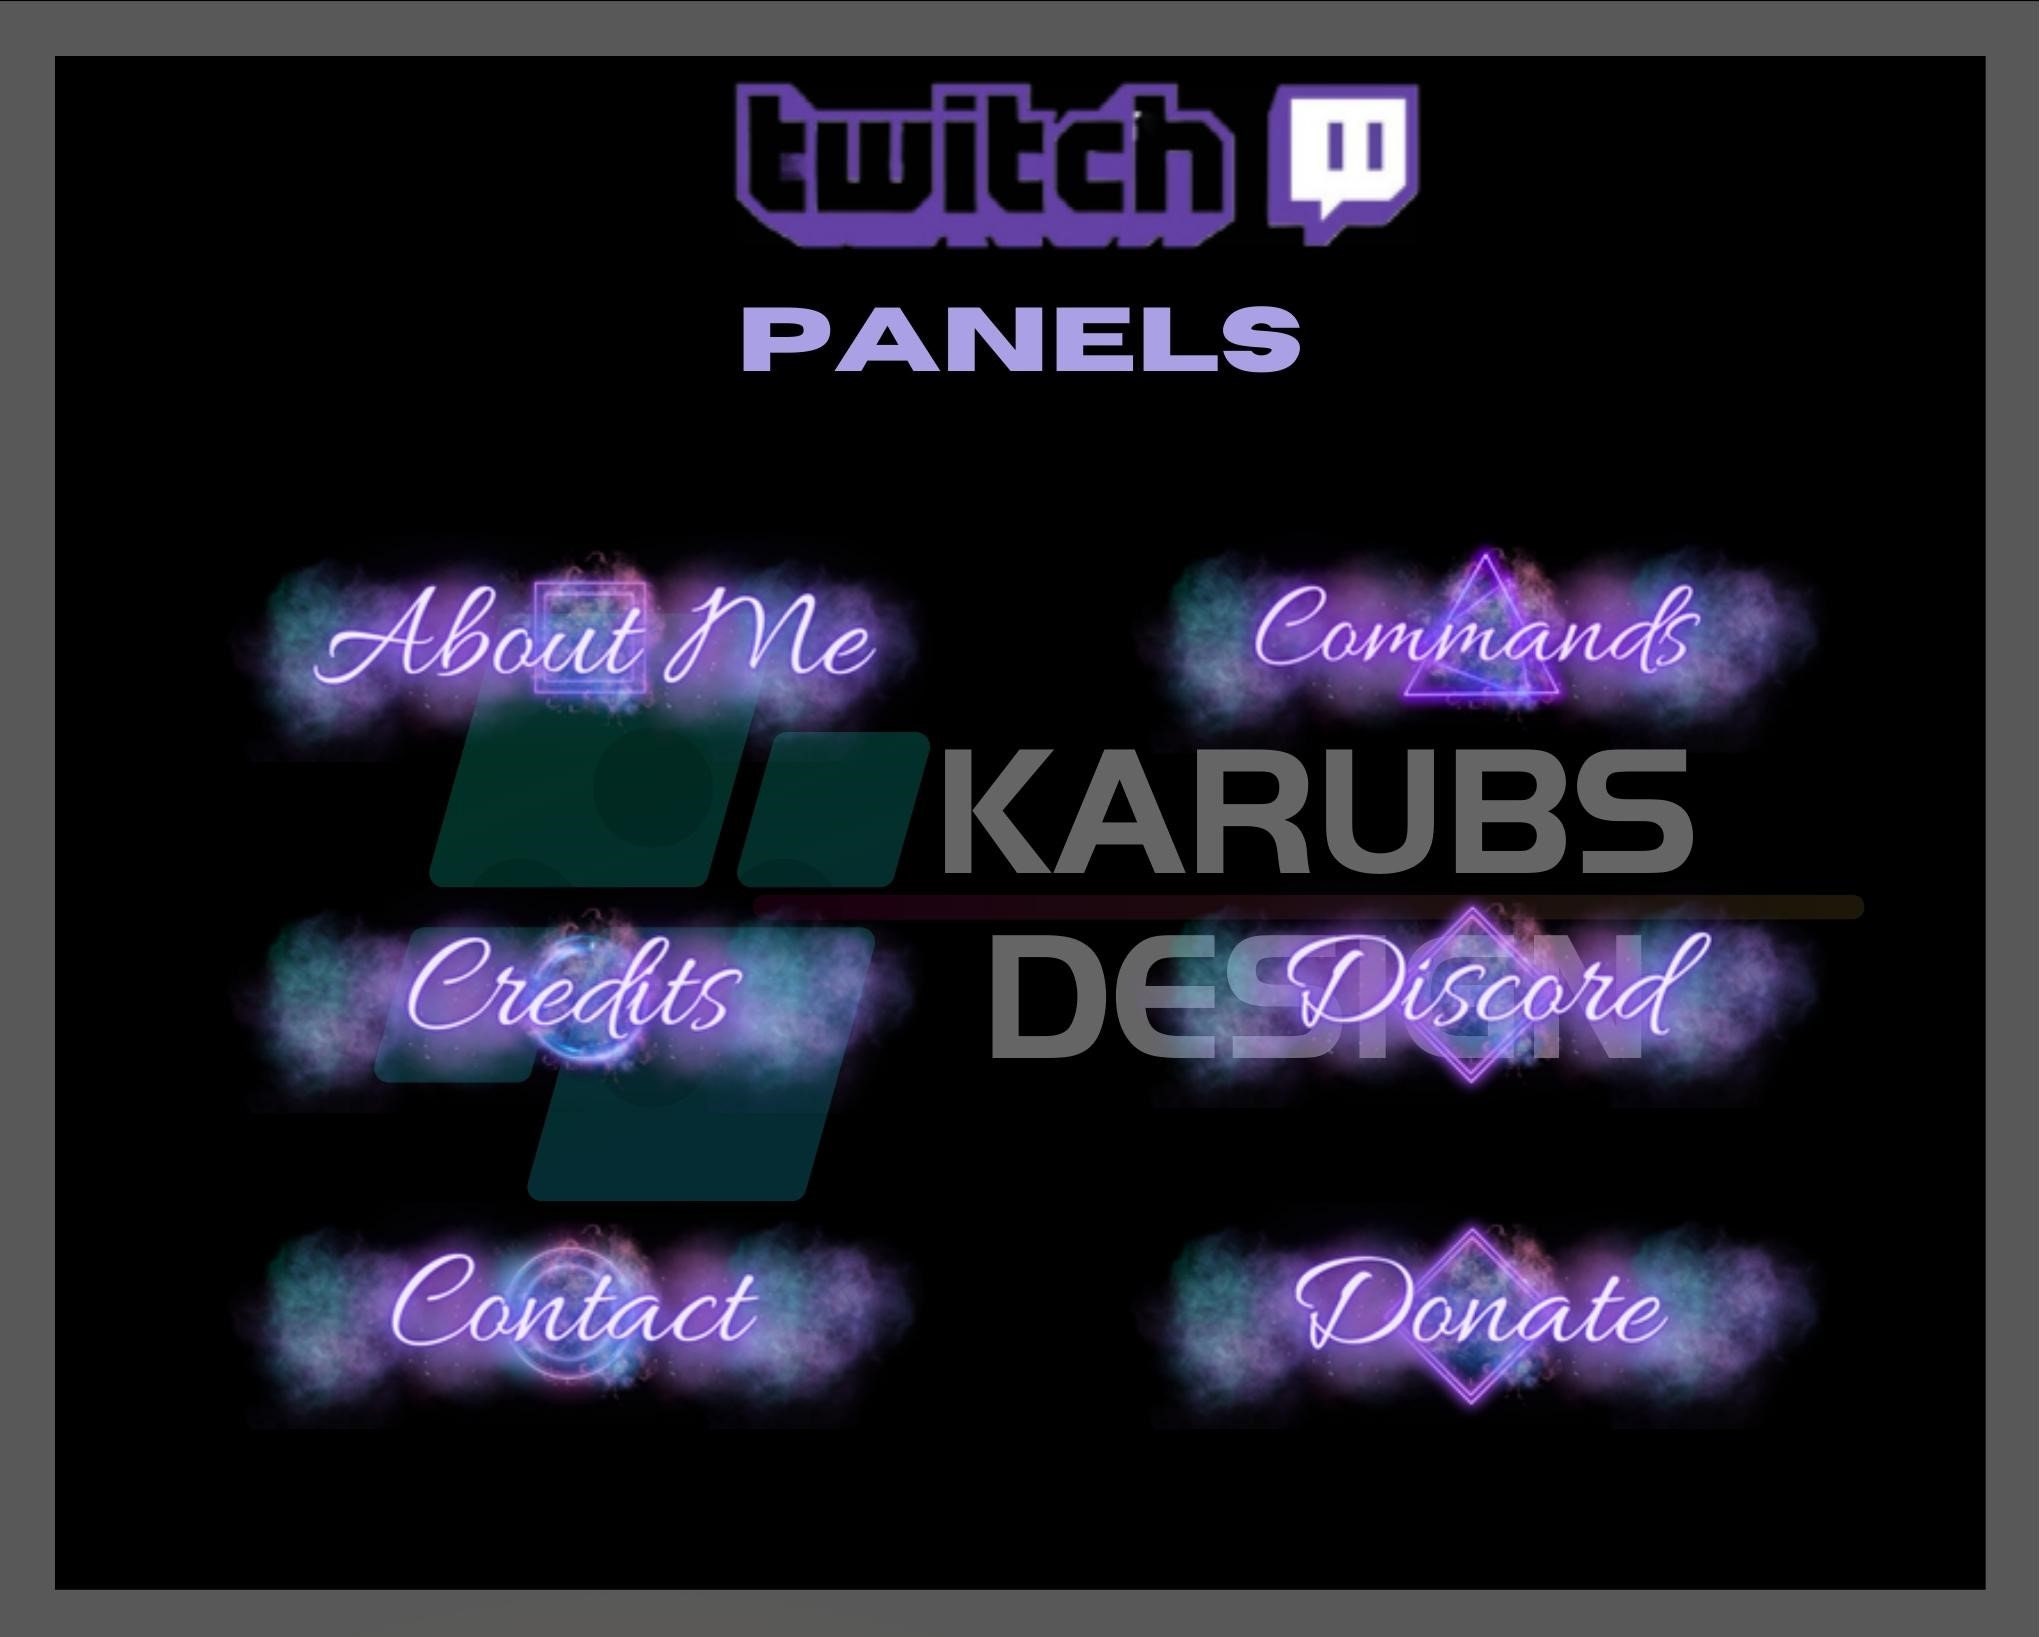 Black and White Twitch Panels 15 Banners Gamer Streamer Retro Theme 